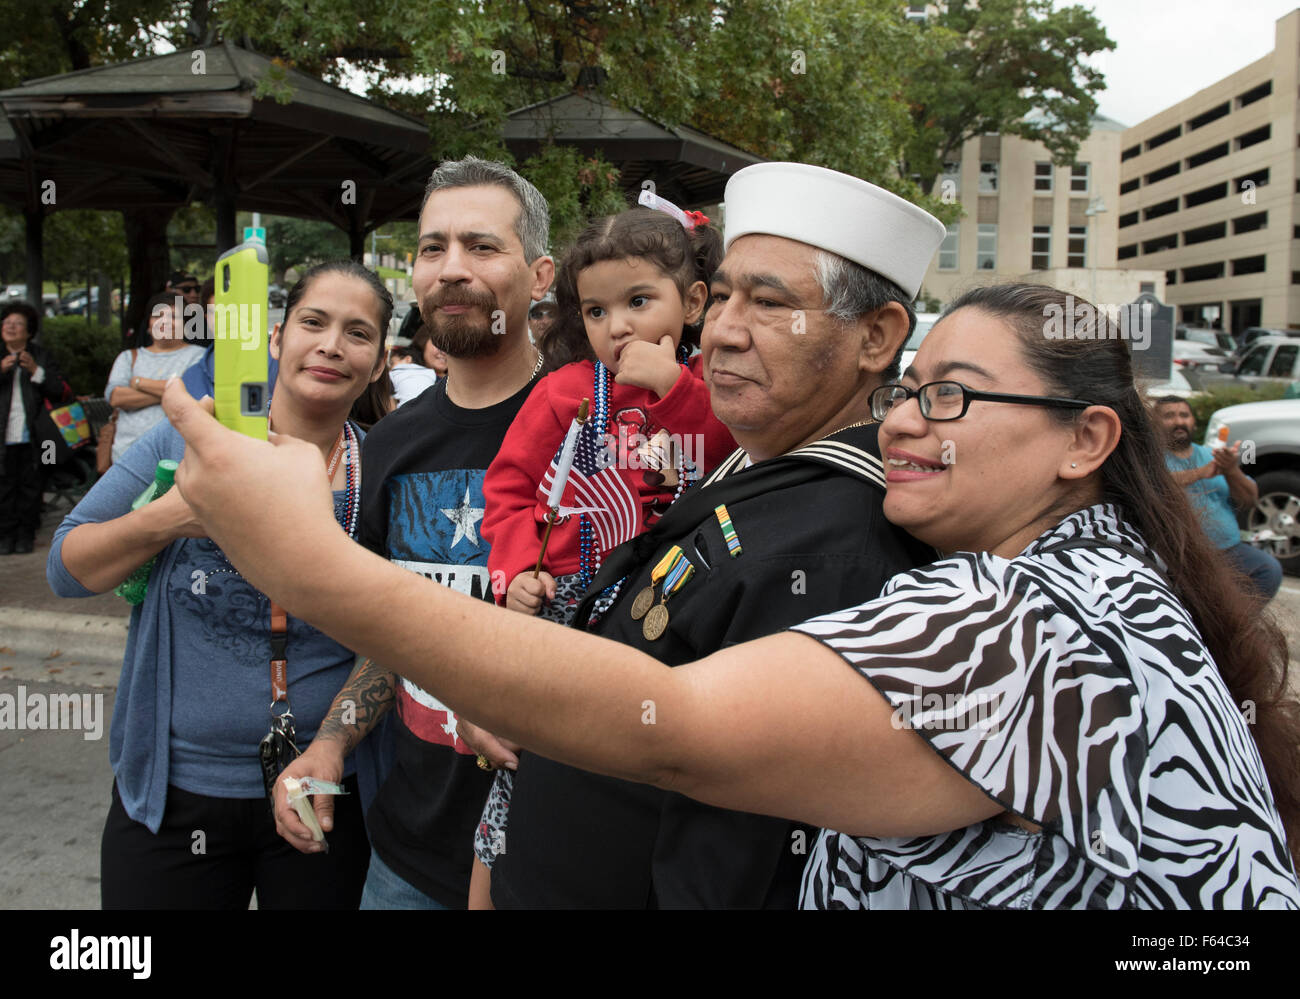 Austin, Texas USA November 11, 2015: After losing his home during recent Texas flooding, veteran Juan DeSantiago of Austin gathers his family for a portrait during the Veteran's Day parade up Congress Avenue and ceremony at the Texas Capitol. Several thousand Texans lined Congress Avenue to witness military heroes, marching bands and floats in the annual parade. Credit:  Bob Daemmrich/Alamy Live News Stock Photo